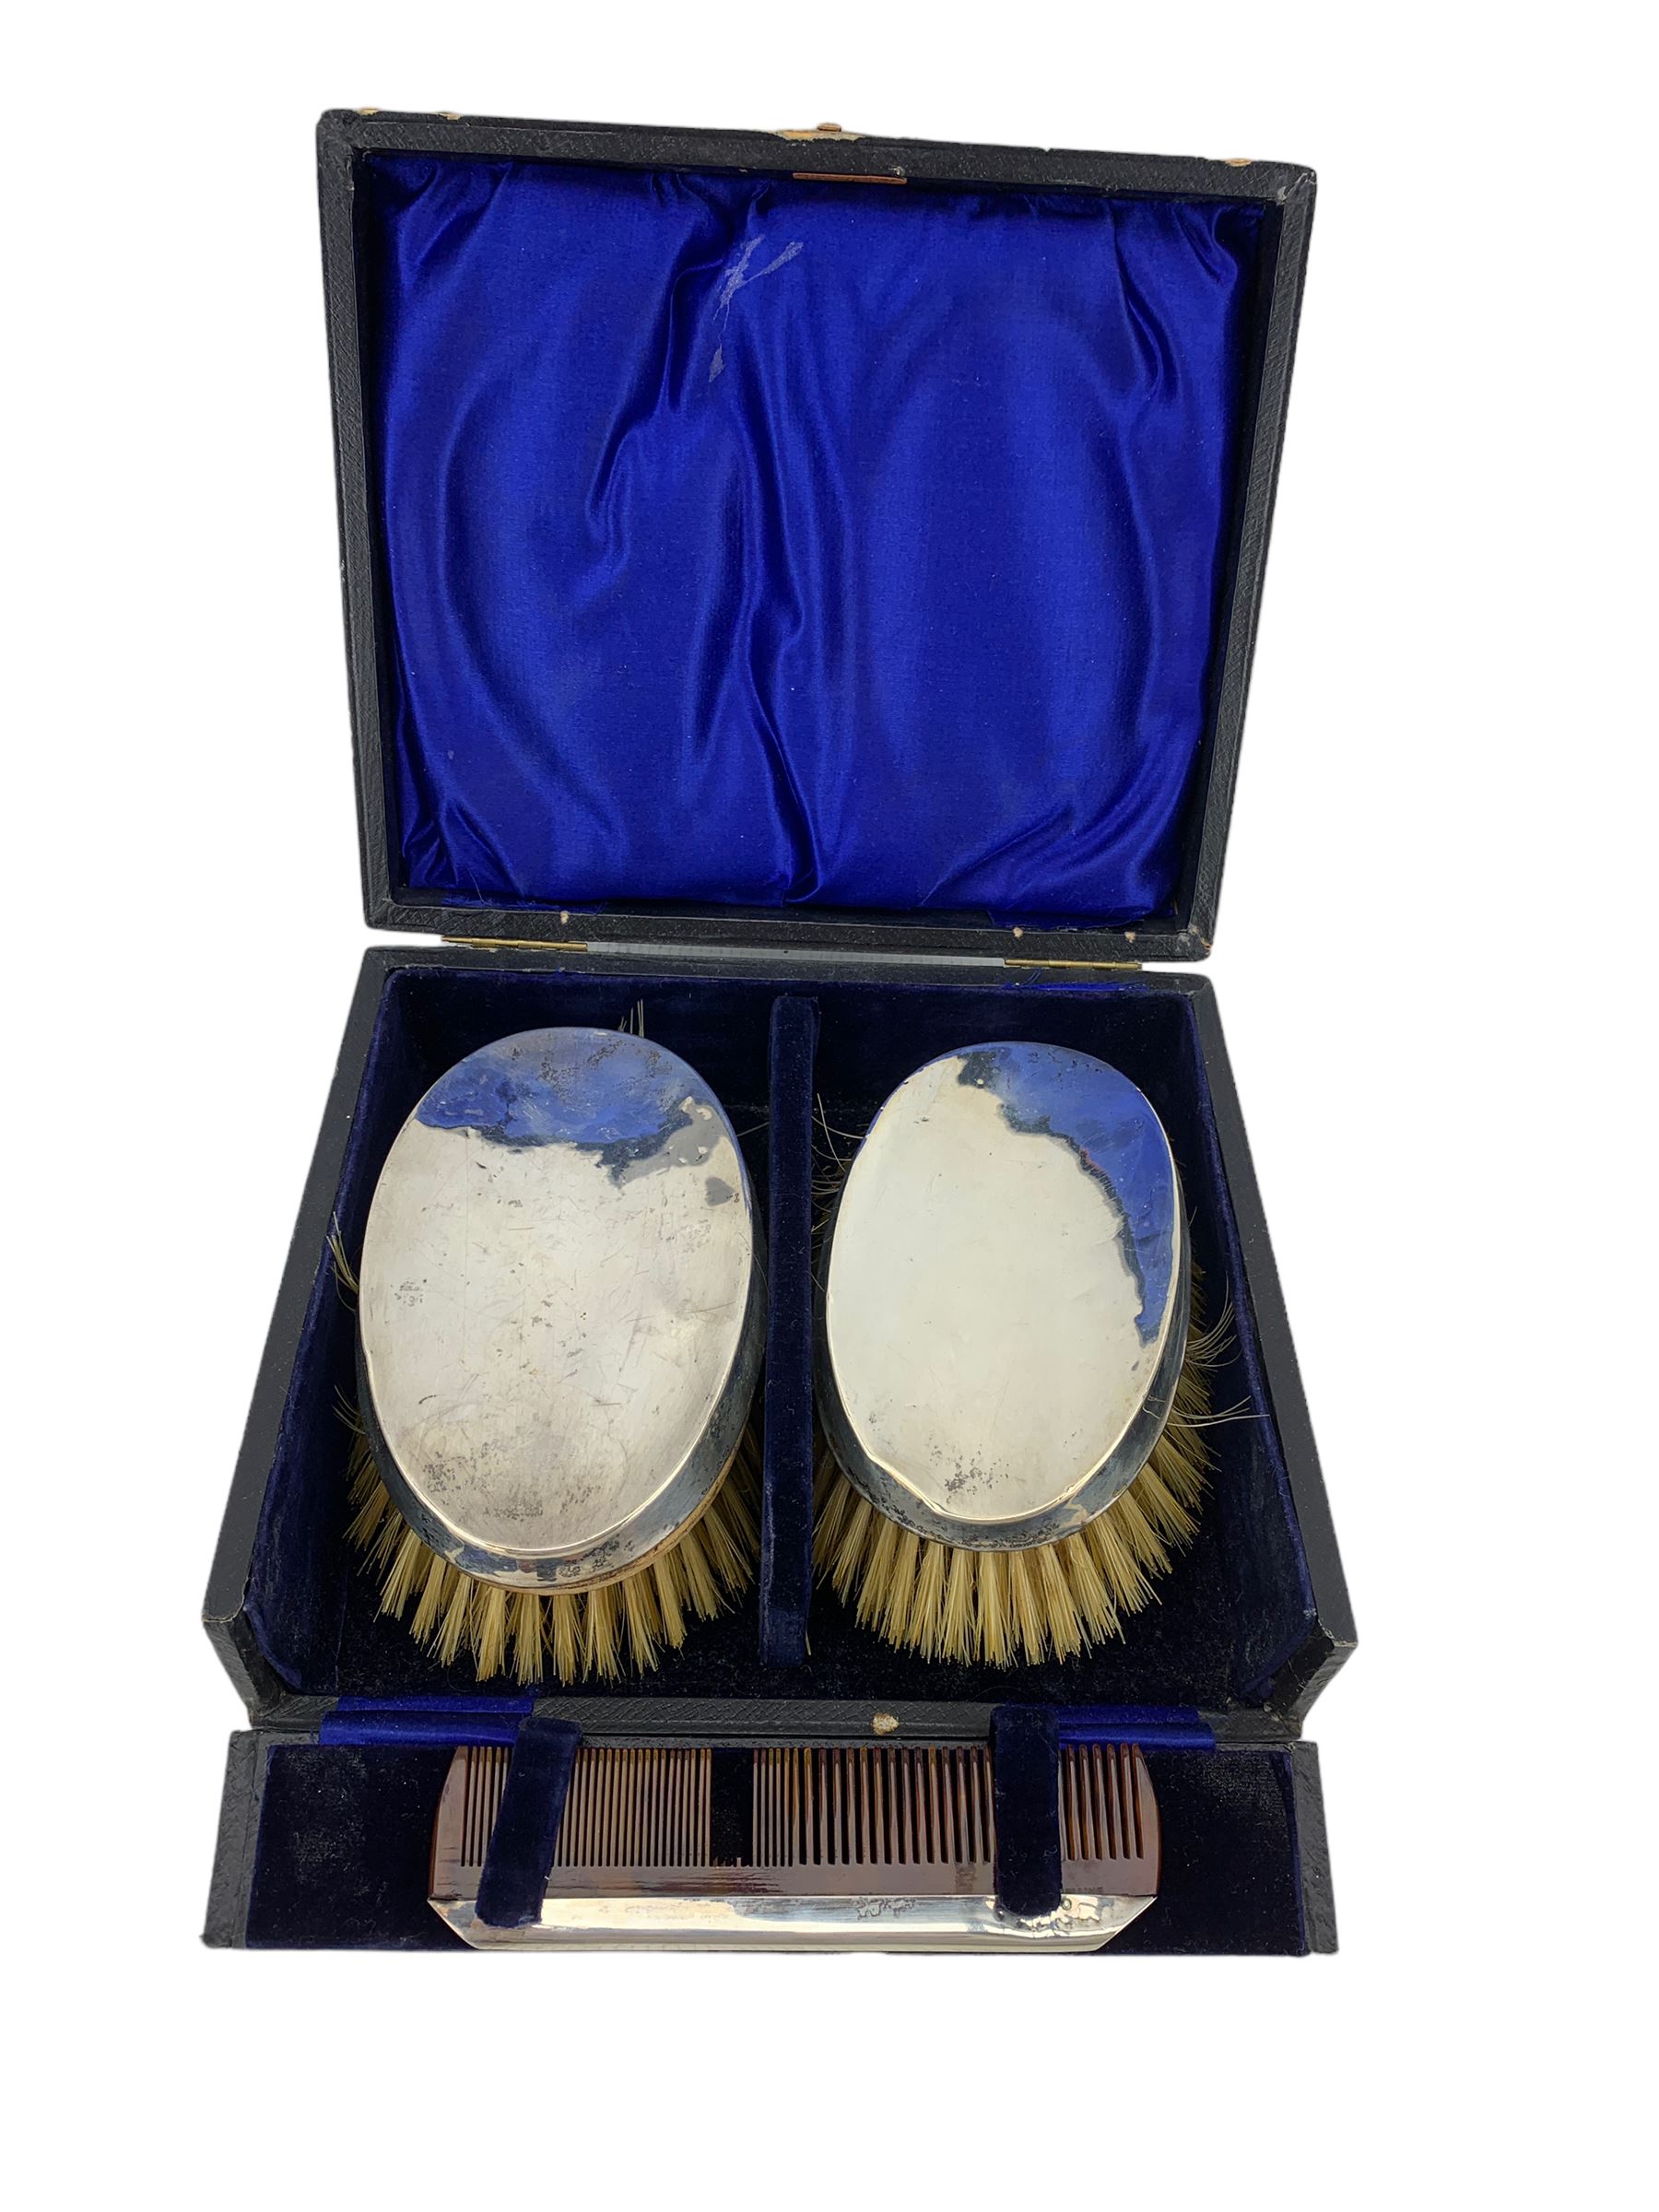 Pair of silver backed brushes and silver mounted comb